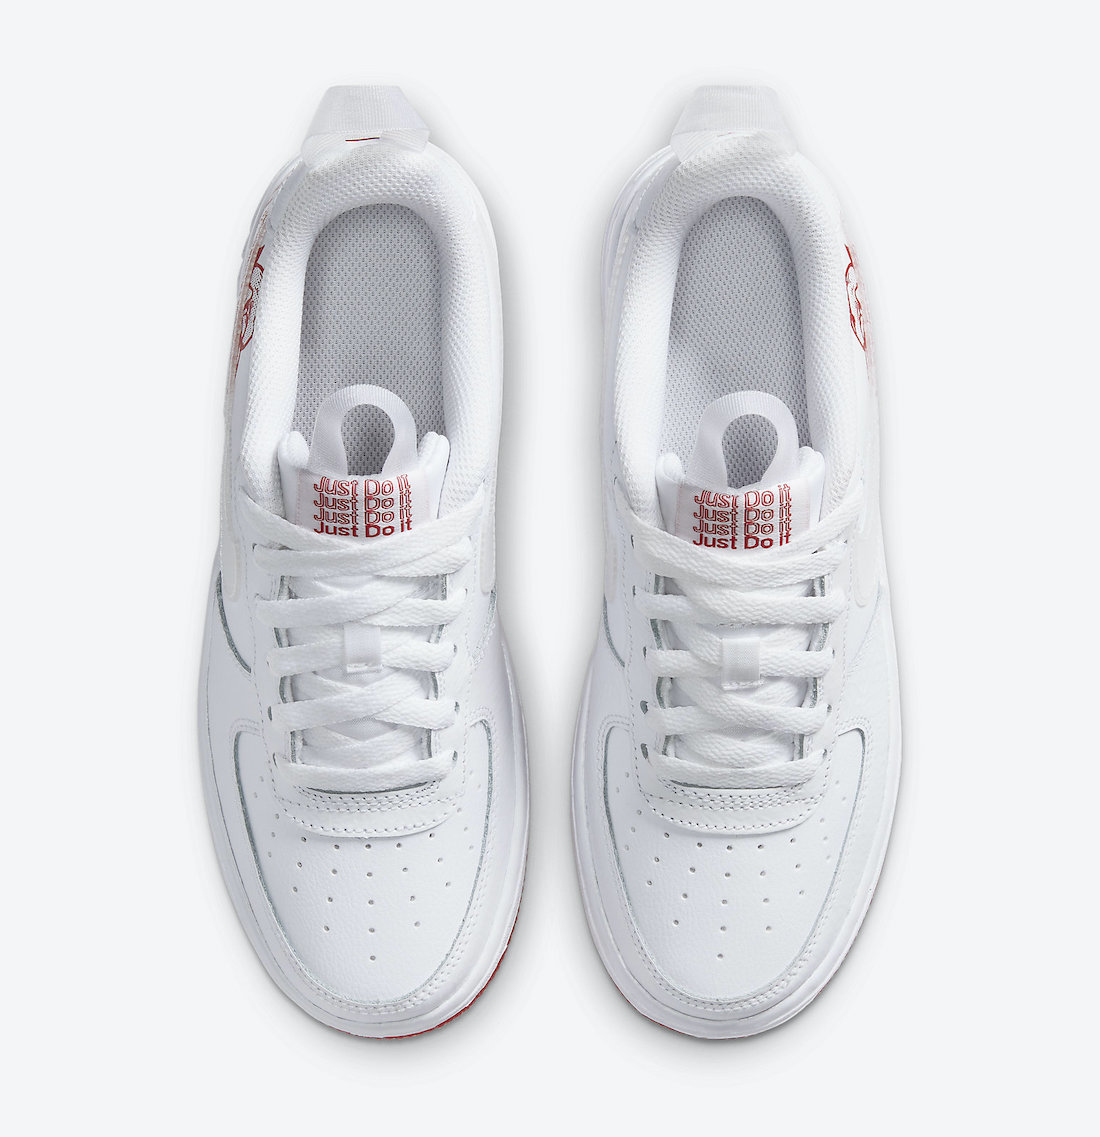 Nike Air Force 1 White University Red Rose CN8534-100 Release Date